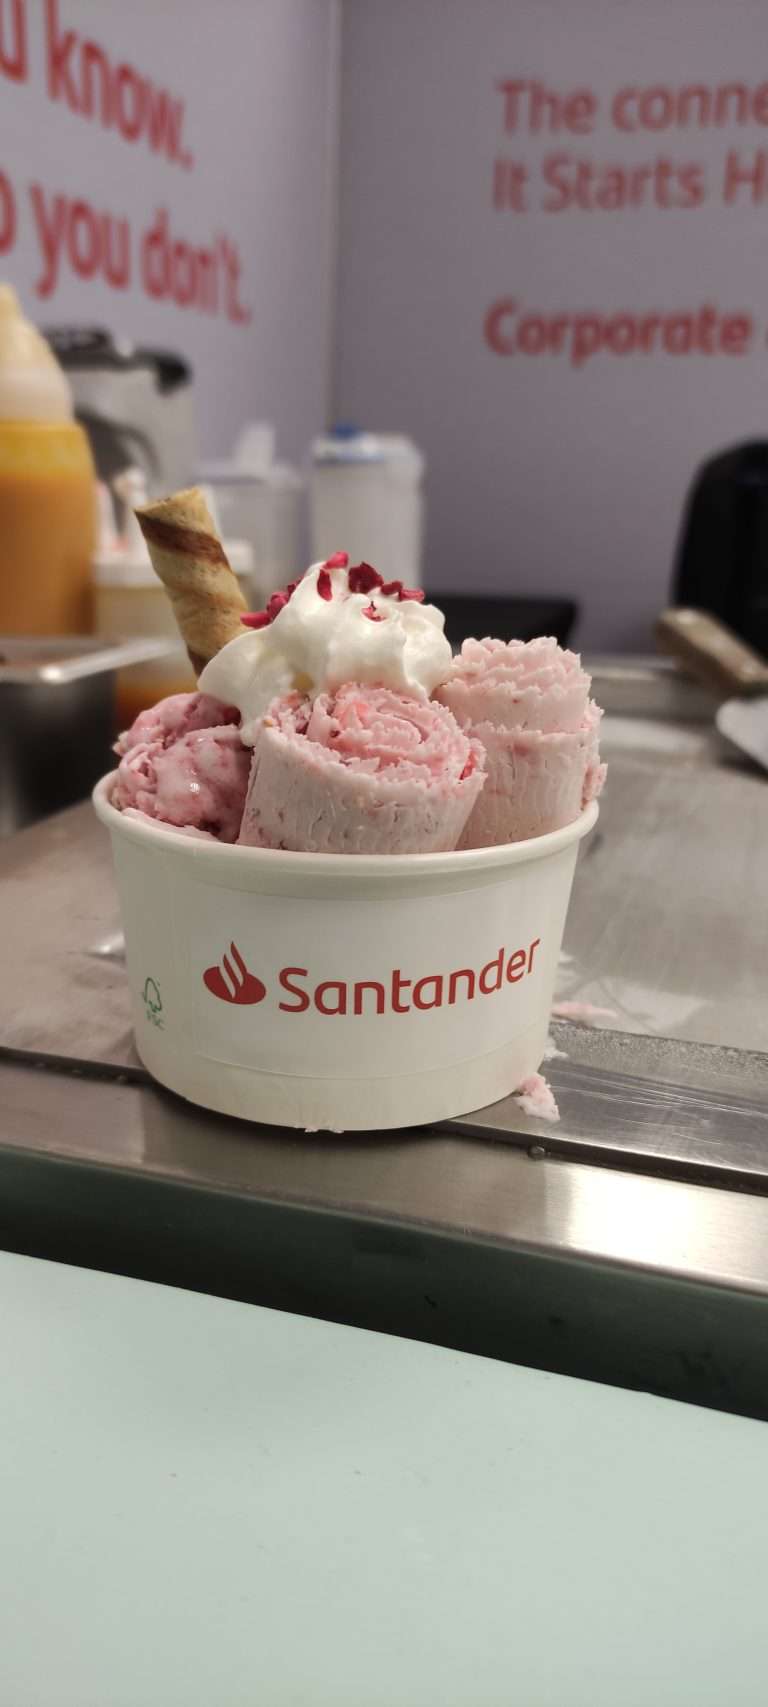 Santander branded Strawberry and Meringue with cream at public finance exhibition